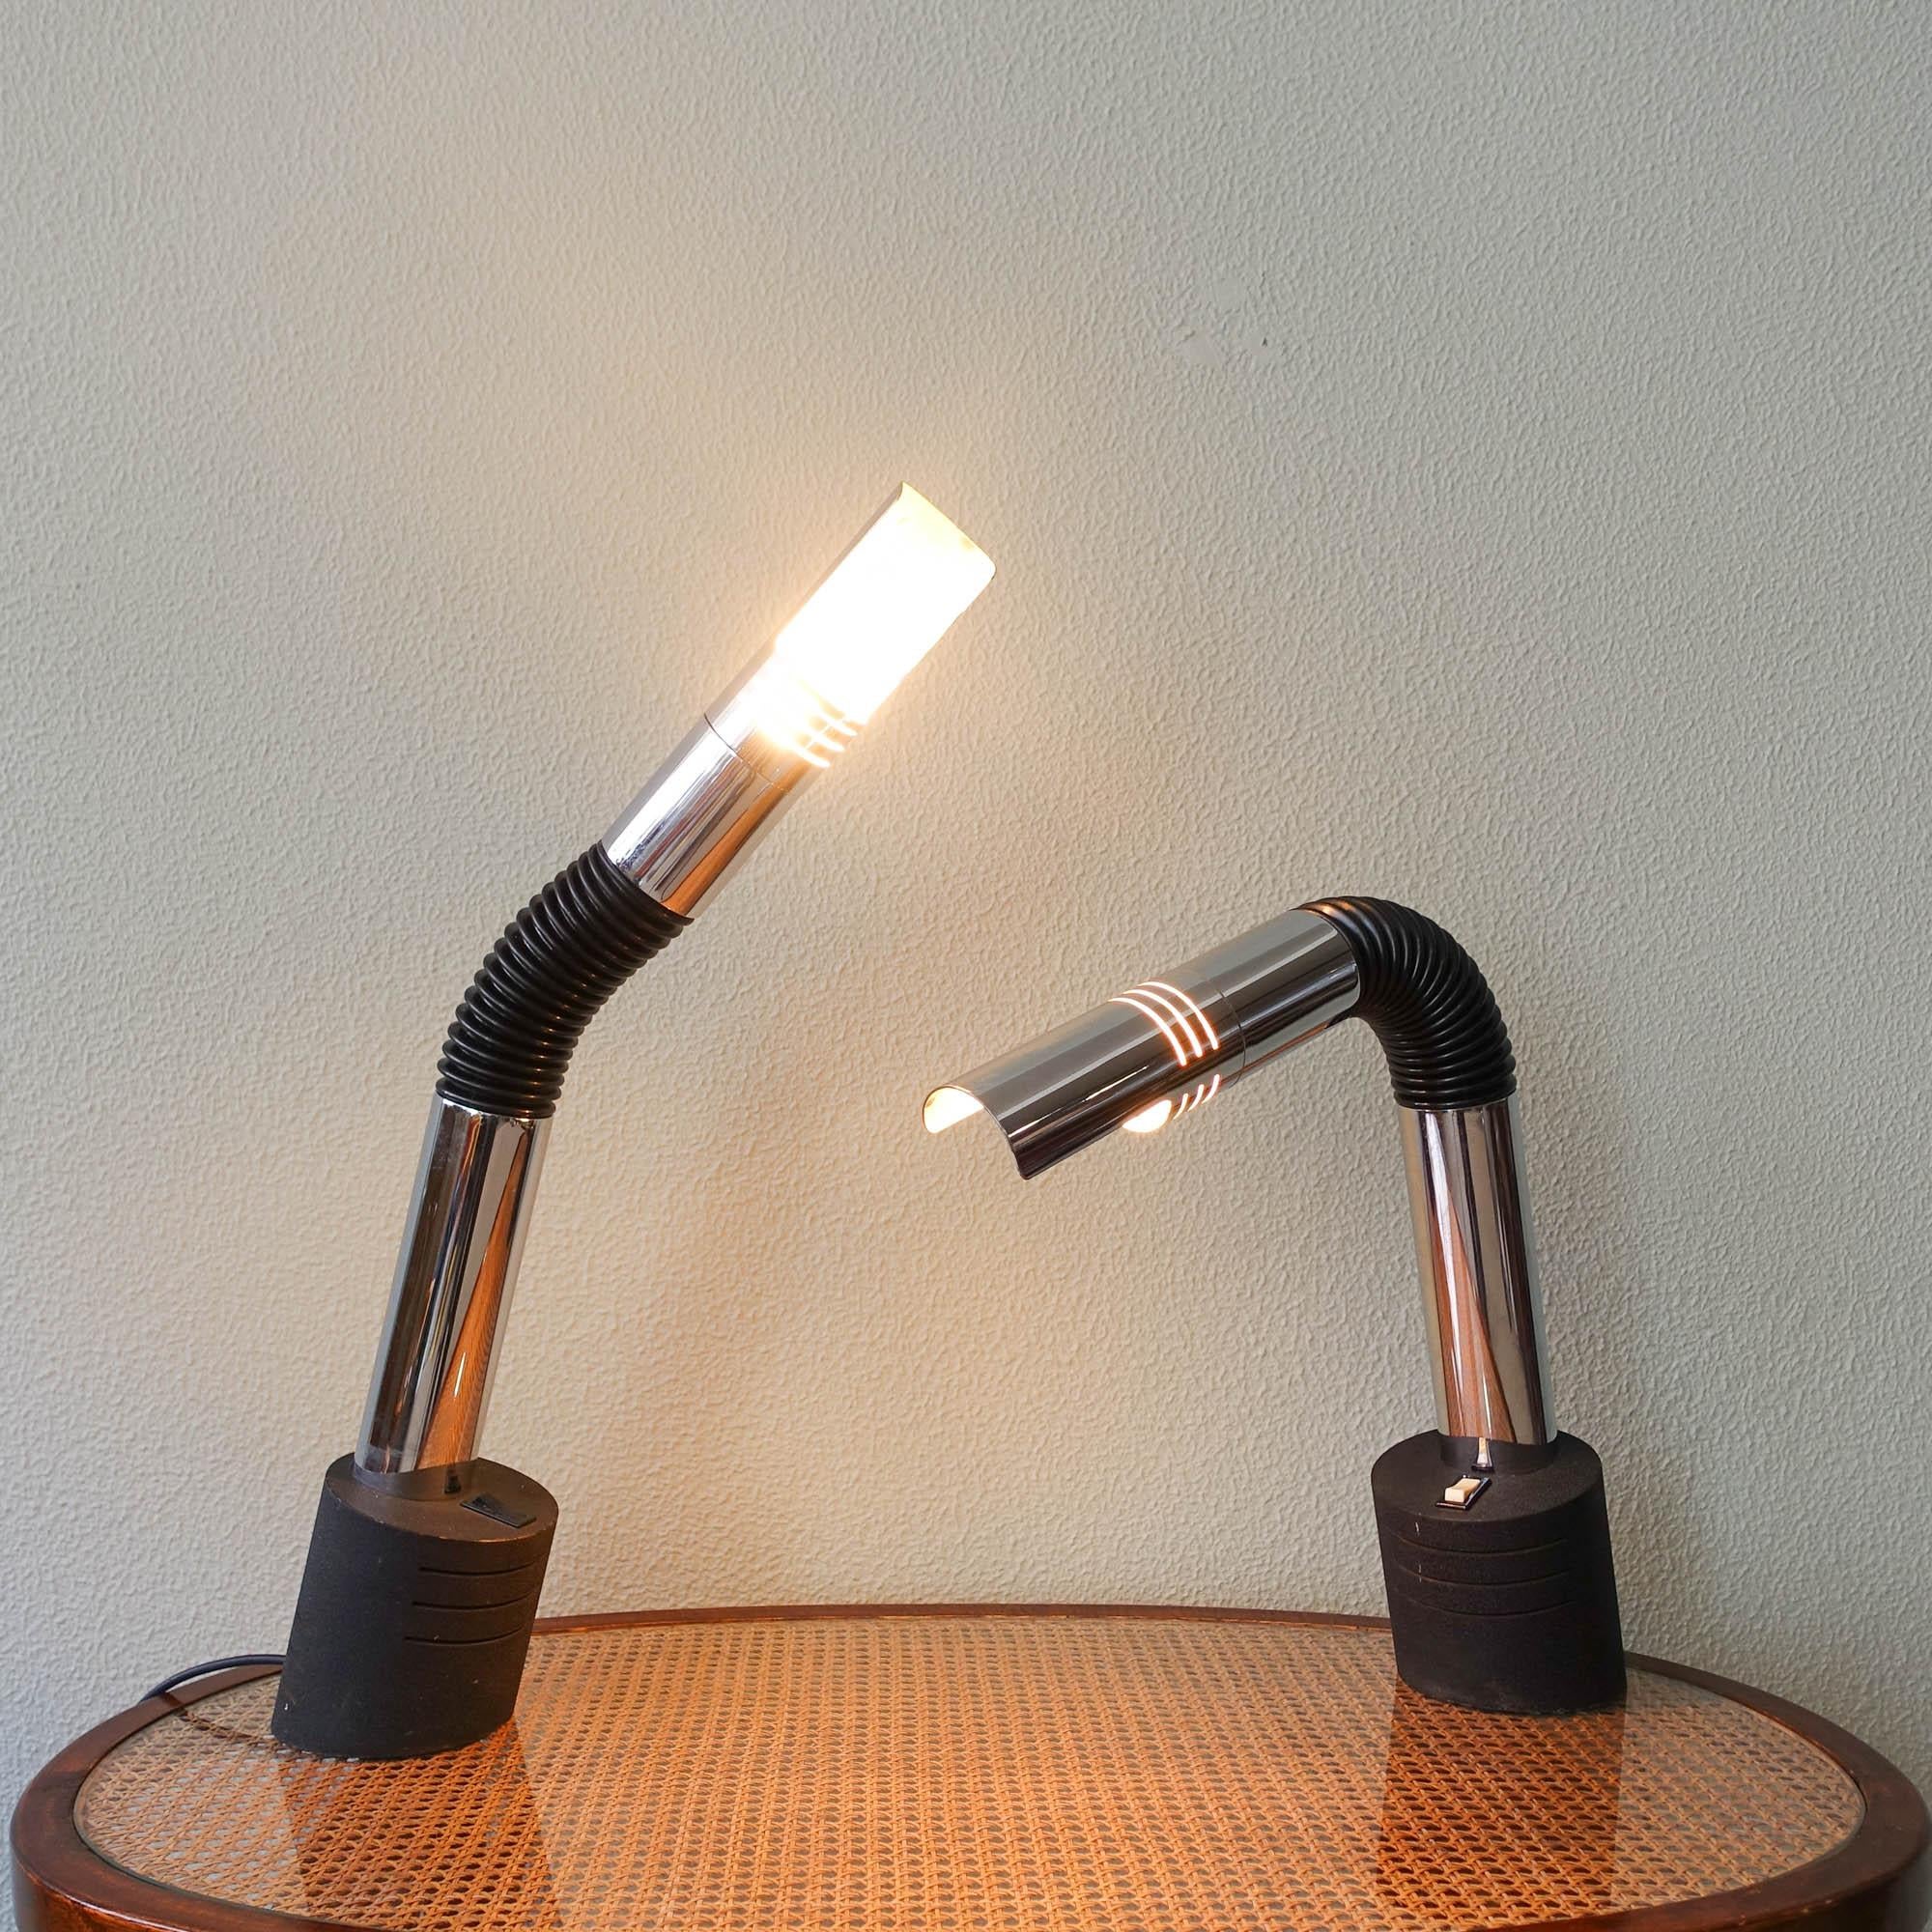 Chrome Pair of “Elbow” Table Lamp by E. Bellini for Targetti Sankey, 1970s For Sale